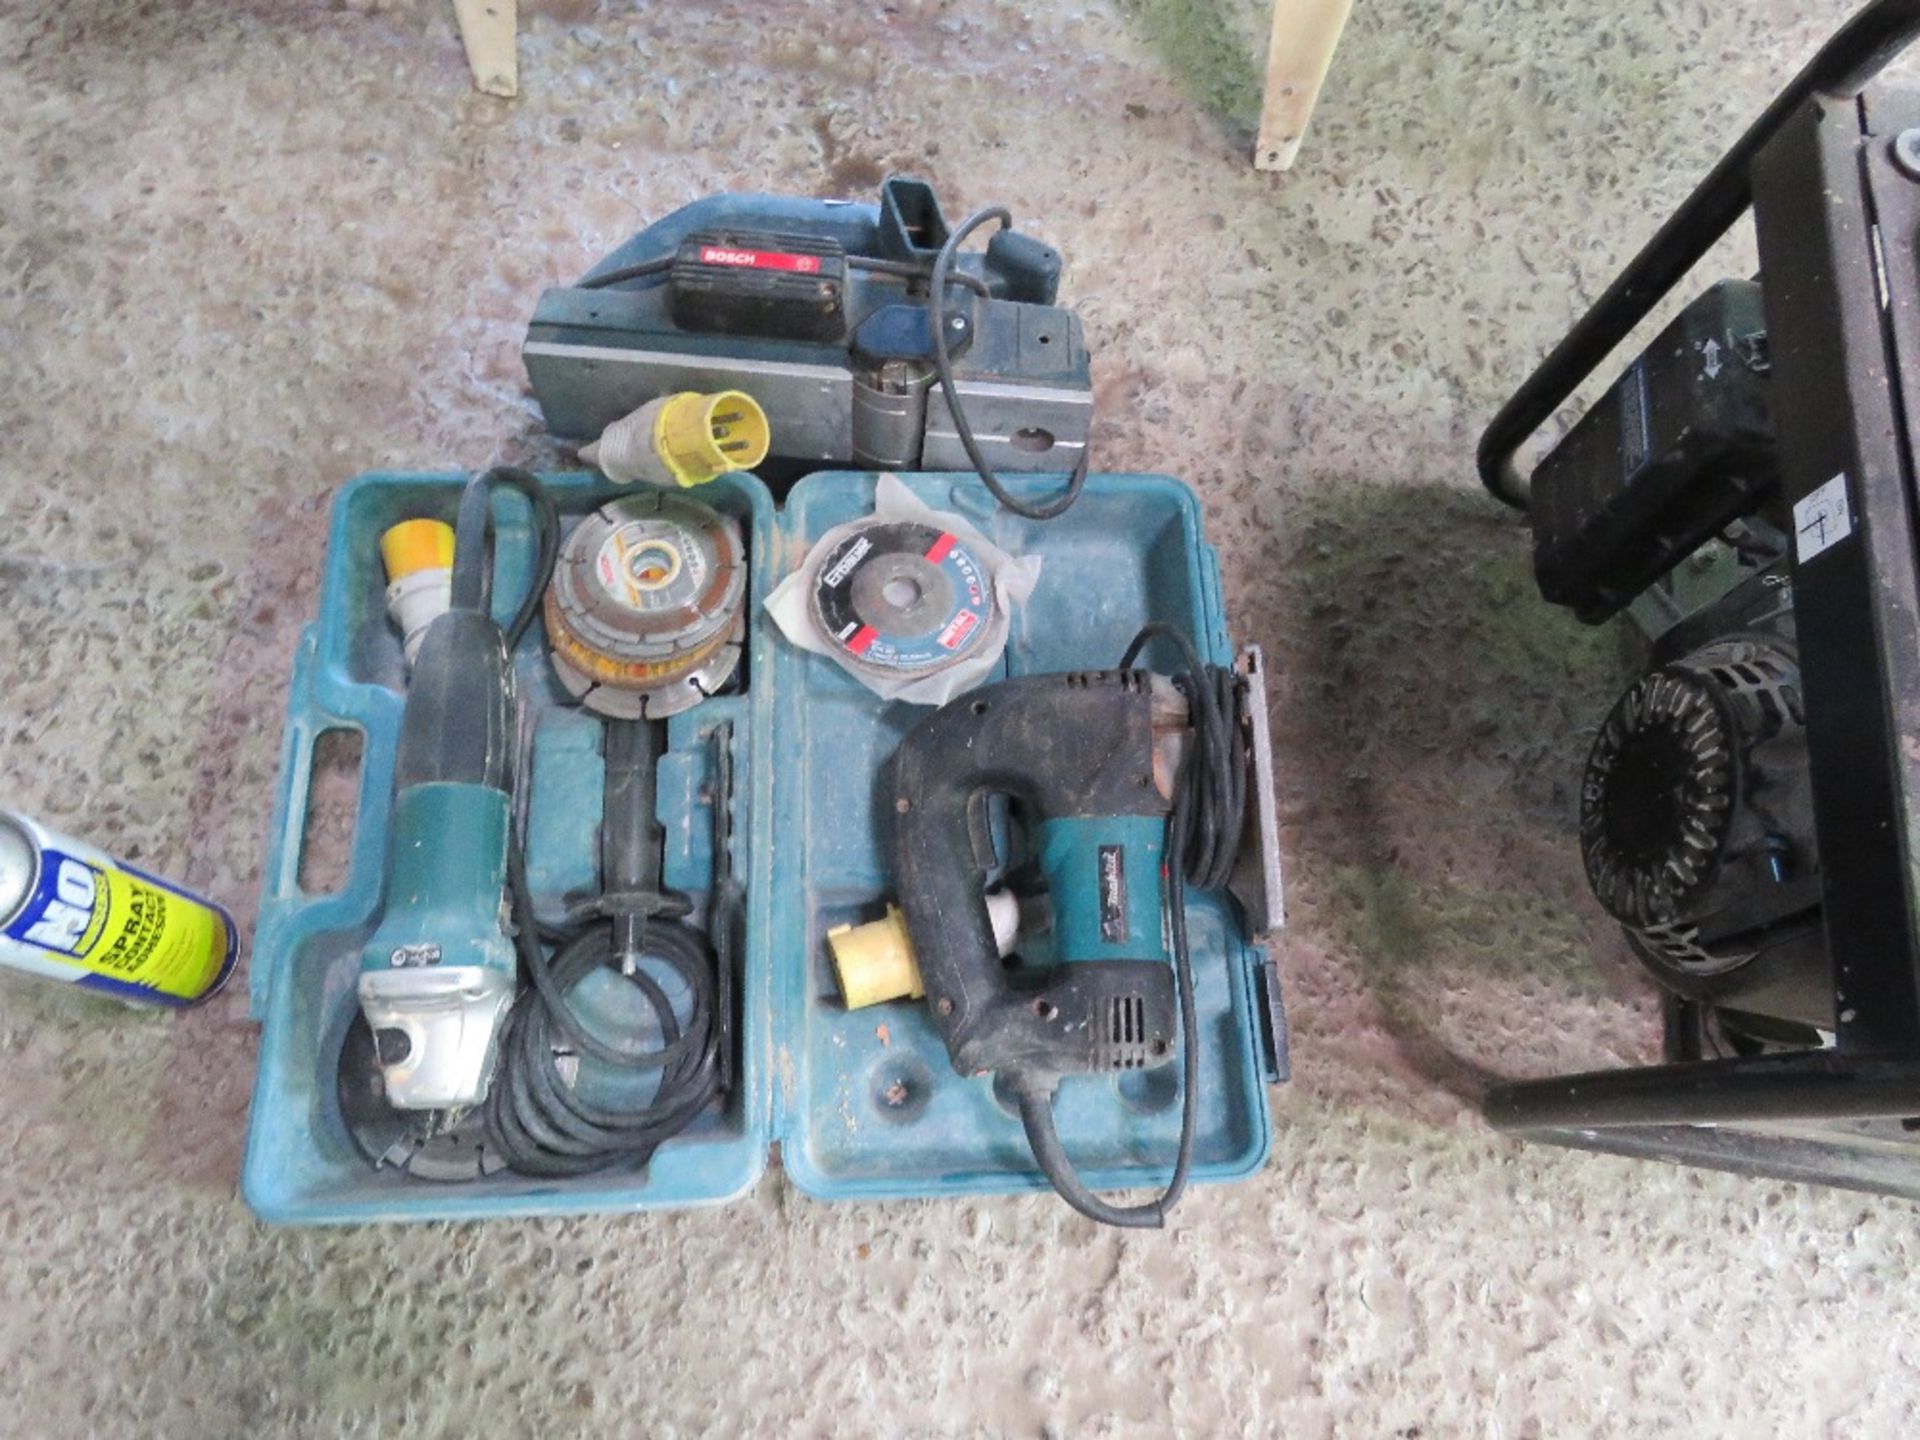 3 X 110VOLT POWER TOOLS: GRINDER, JIGSAW AND PLANER.DIRECT FROM COMPANY ADMINISTRATION. - Image 2 of 3